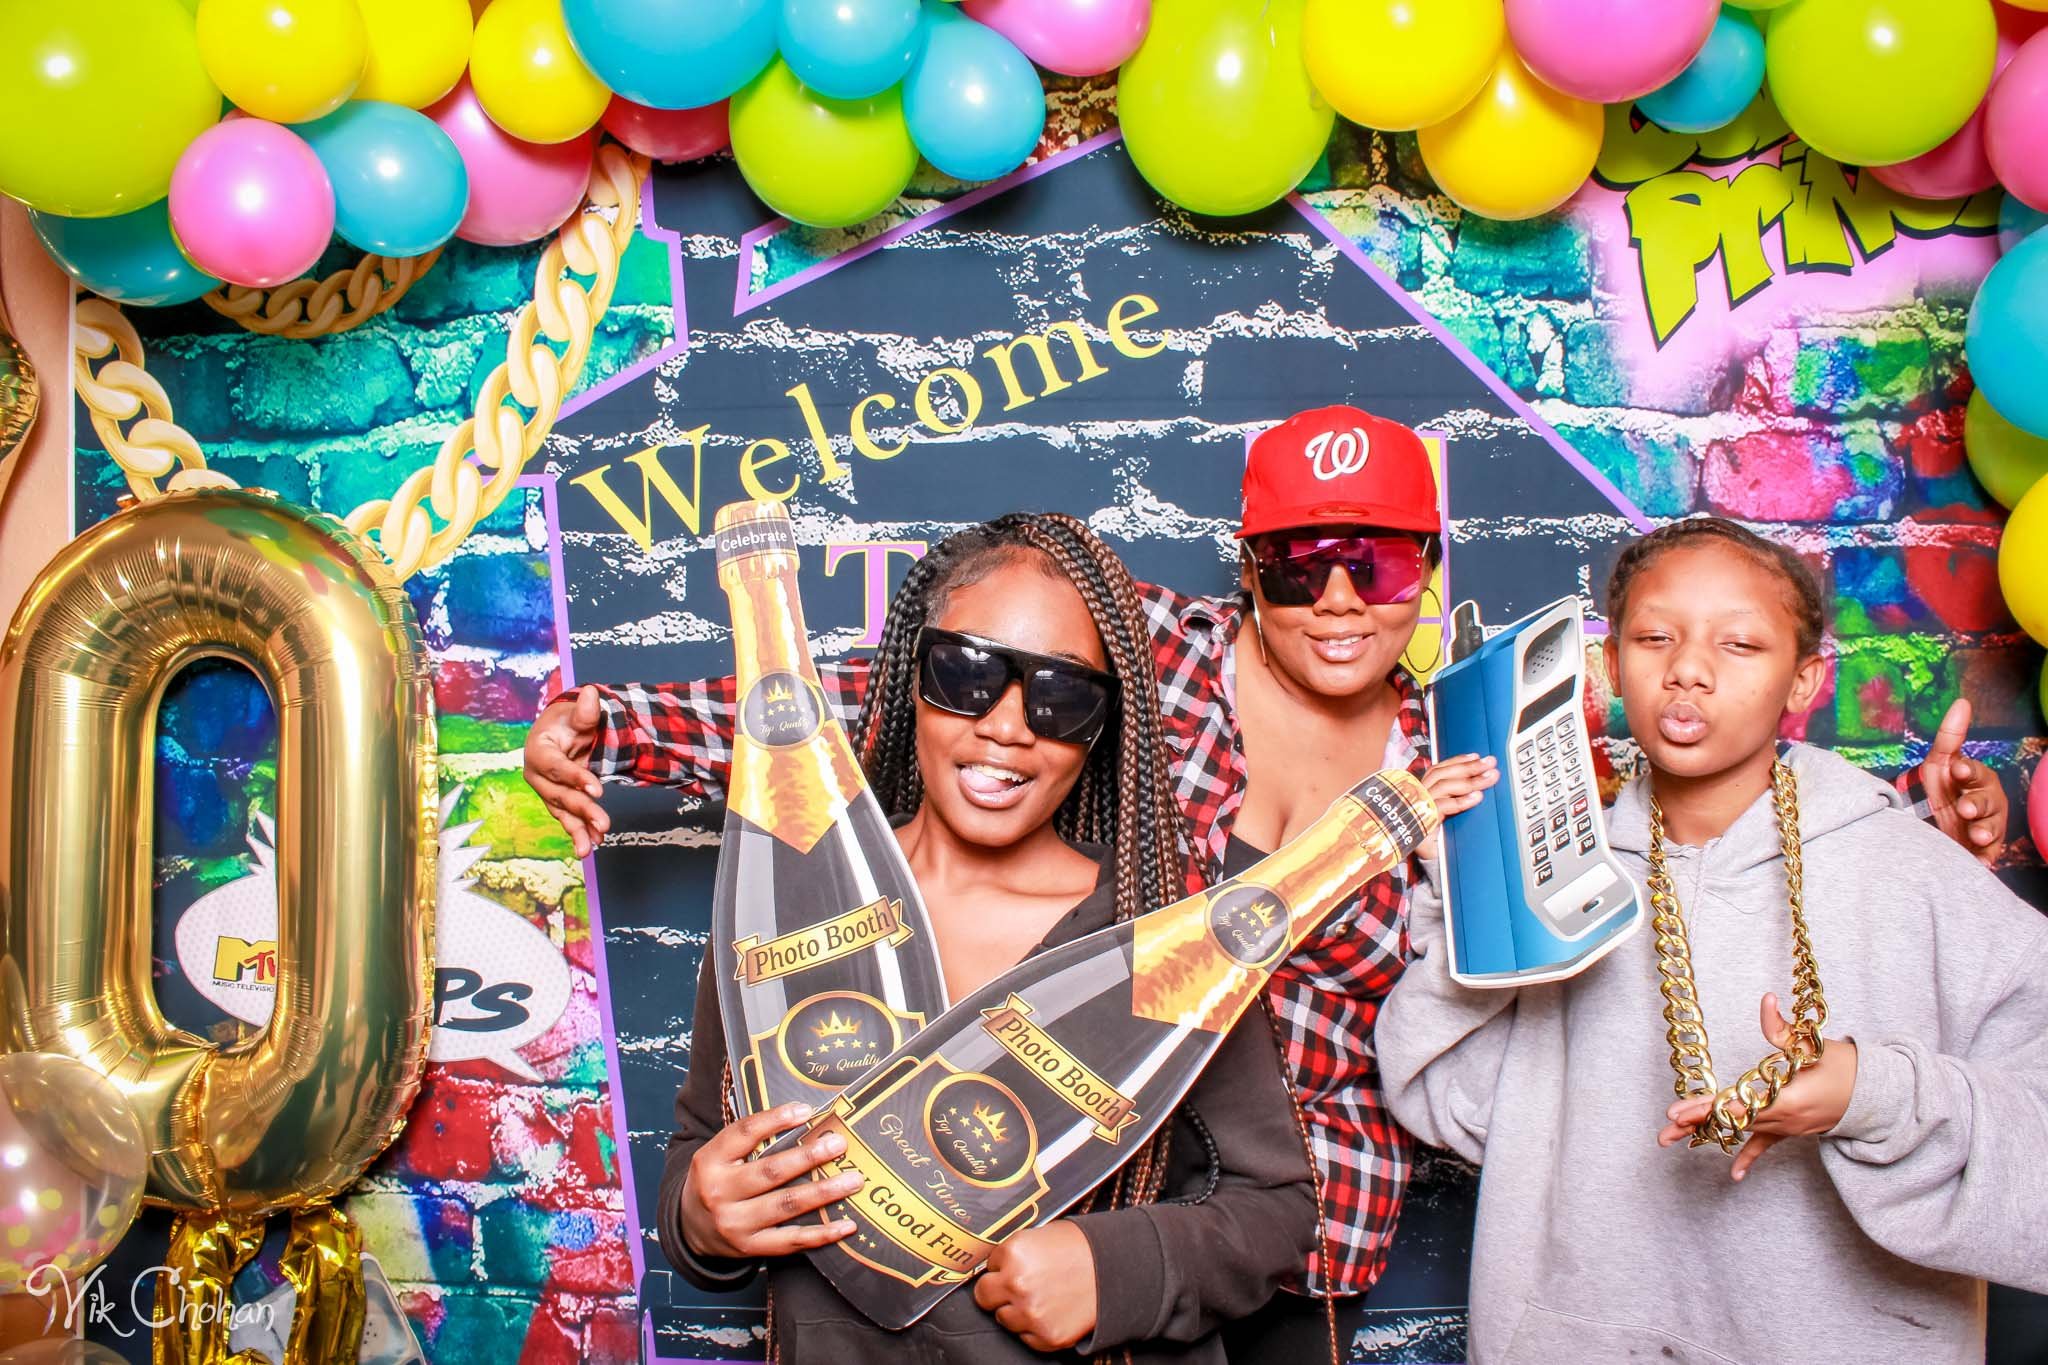 2022-11-26-Fabreonne-40-and-Fabulous-Birthday-House-Party-Photo-Booth-Vik-Chohan-Photography-Photo-Booth-Social-Media-VCP-018.jpg